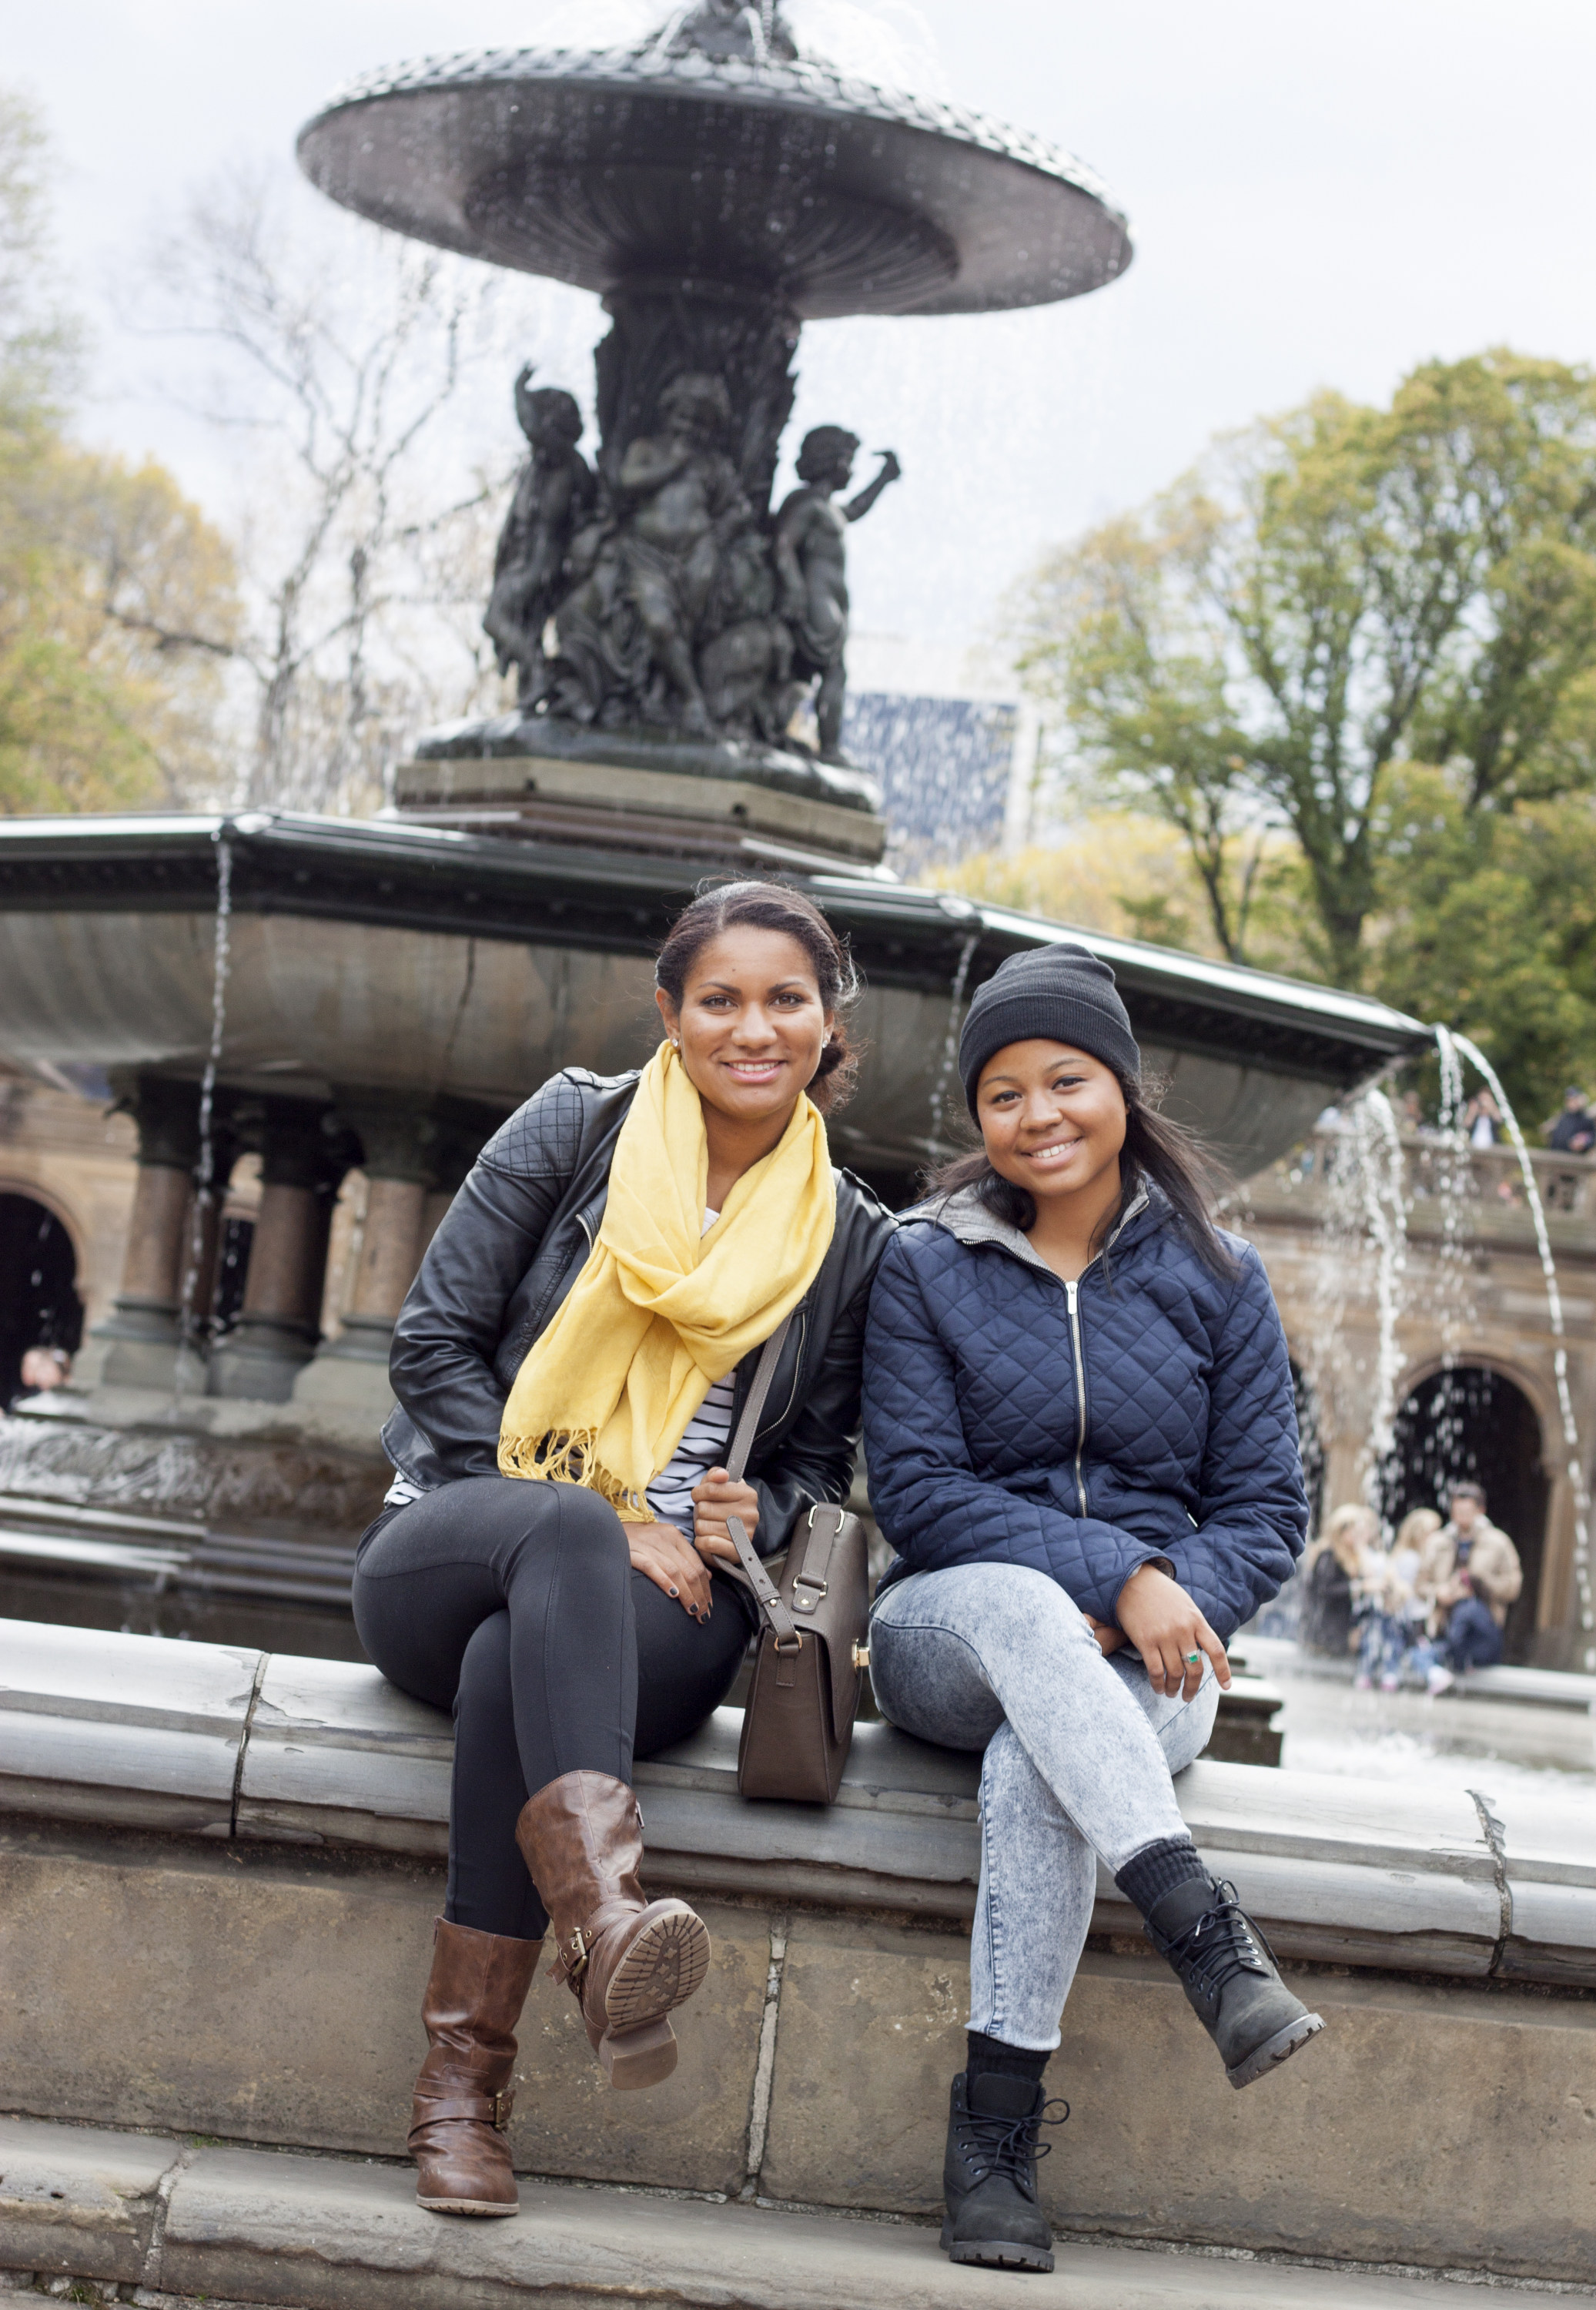 Seniors Britney Johnson, a graphic design major from Bay St. Louis, and Christina McField, a fine arts major from Madison, relax at Central Park's Bethesda Fountain. They were among 16 MSU art majors recently completing a five-day field study in New York City.